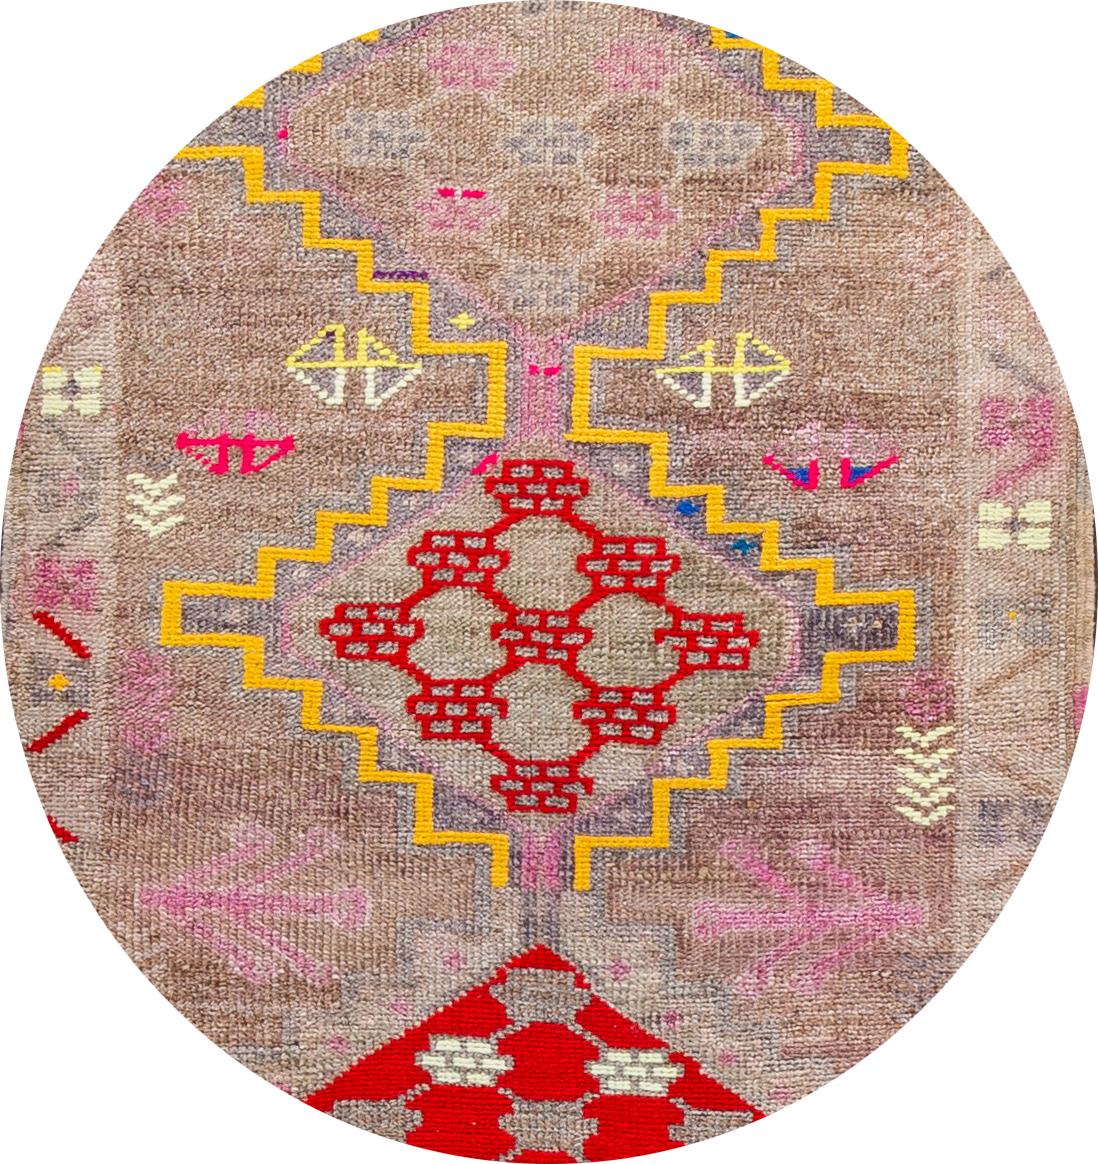 Beautiful vintage runner rug, hand knotted wool with a tan field, multi-color accents in multi medallion design,
circa 1940.
This rug measures 3' 3